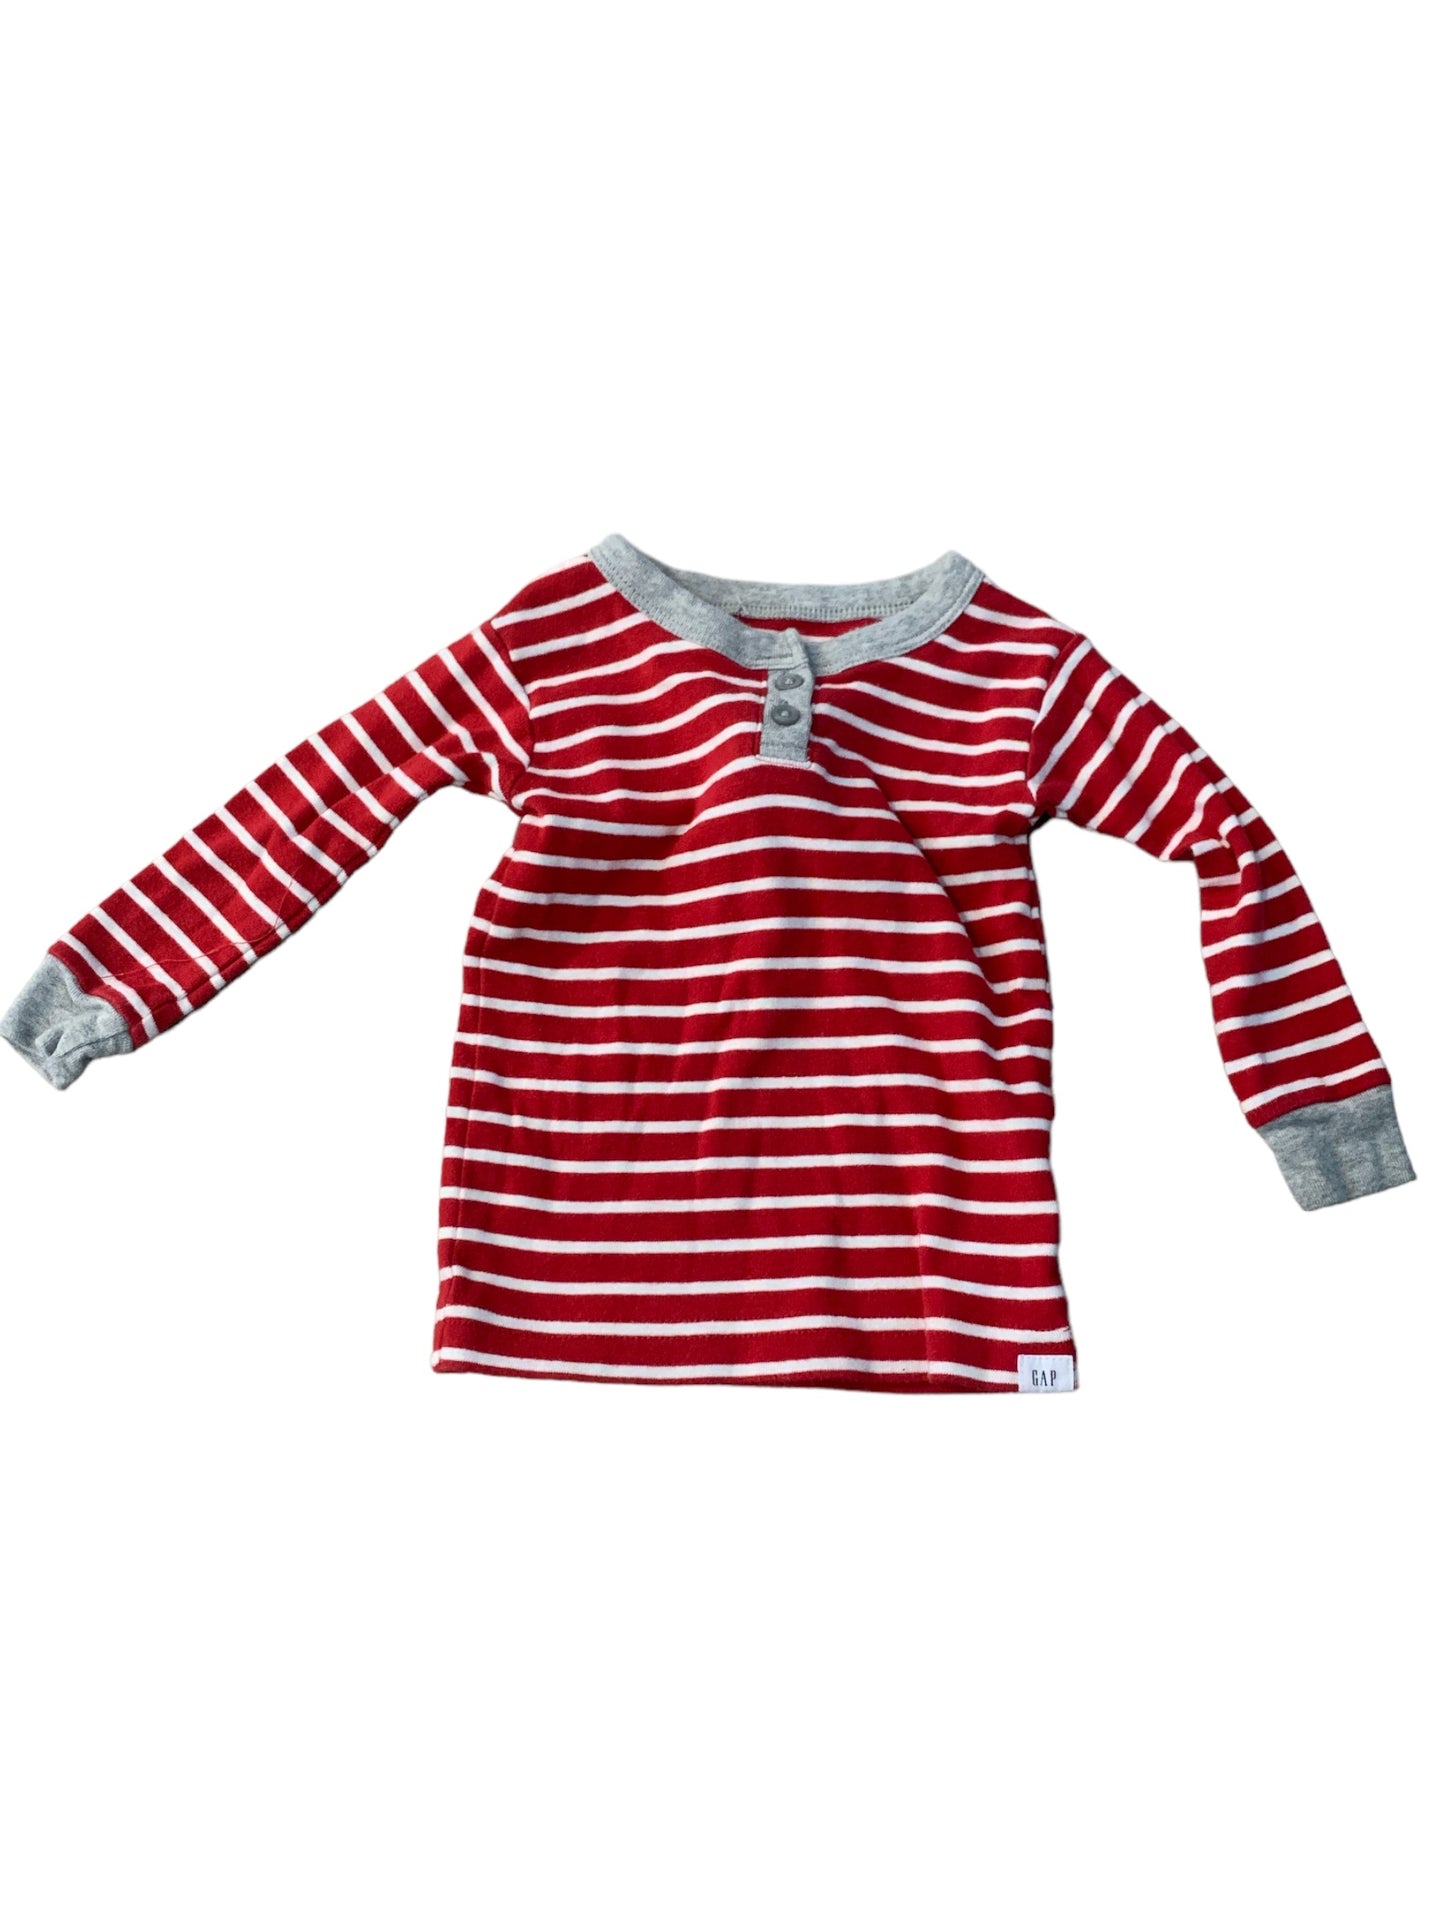 Red Stripped Shirt Size 12-18m